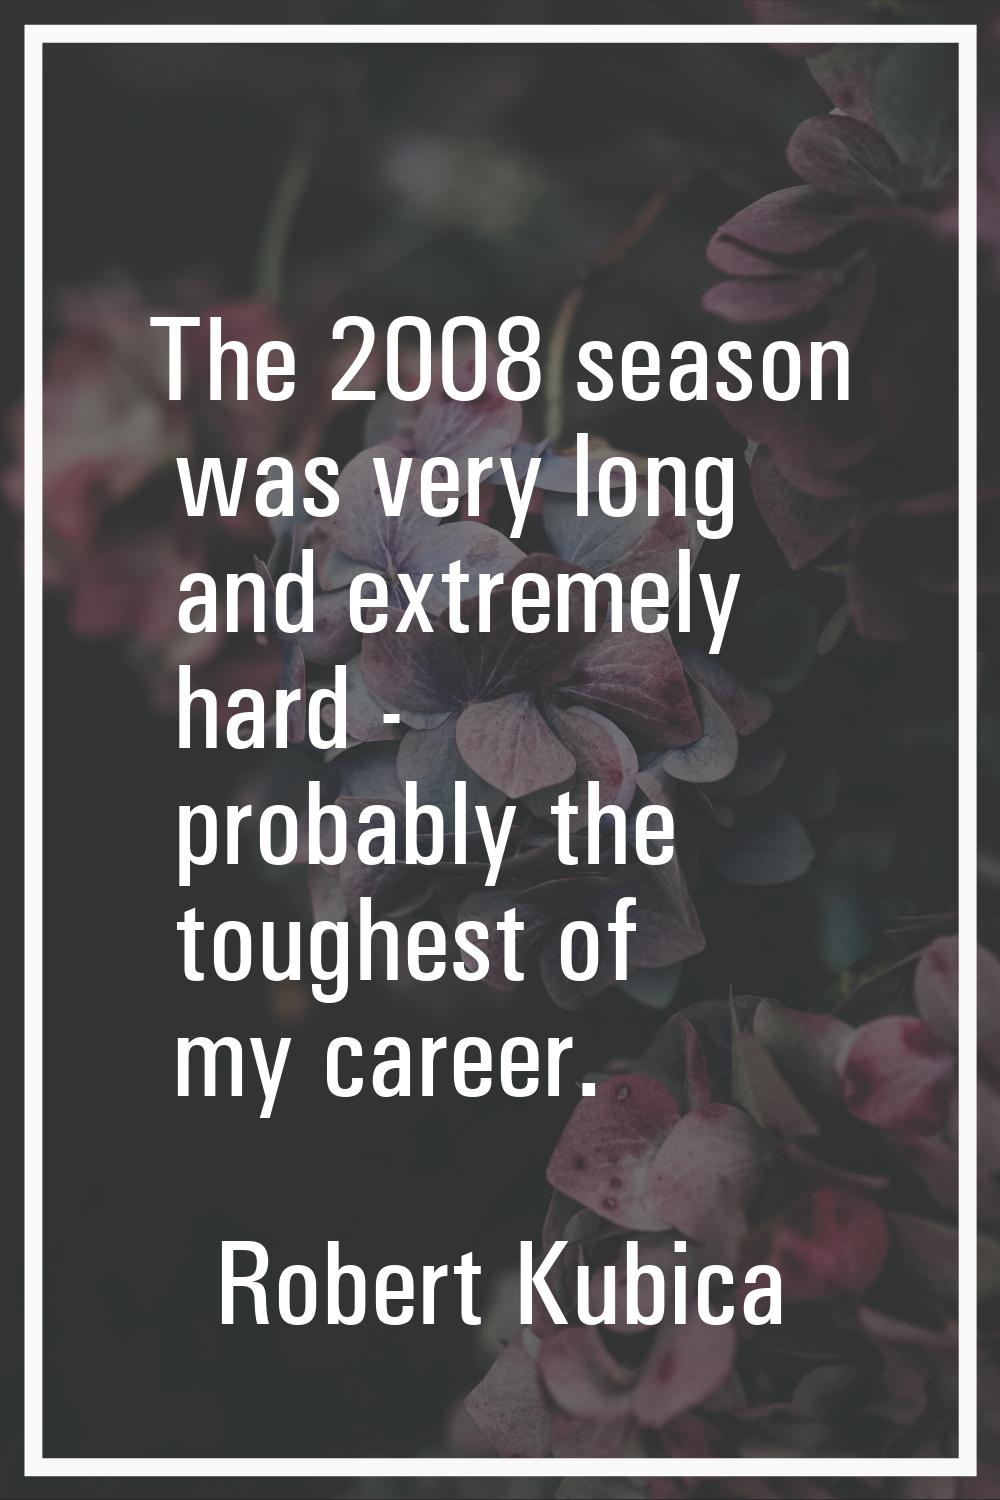 The 2008 season was very long and extremely hard - probably the toughest of my career.